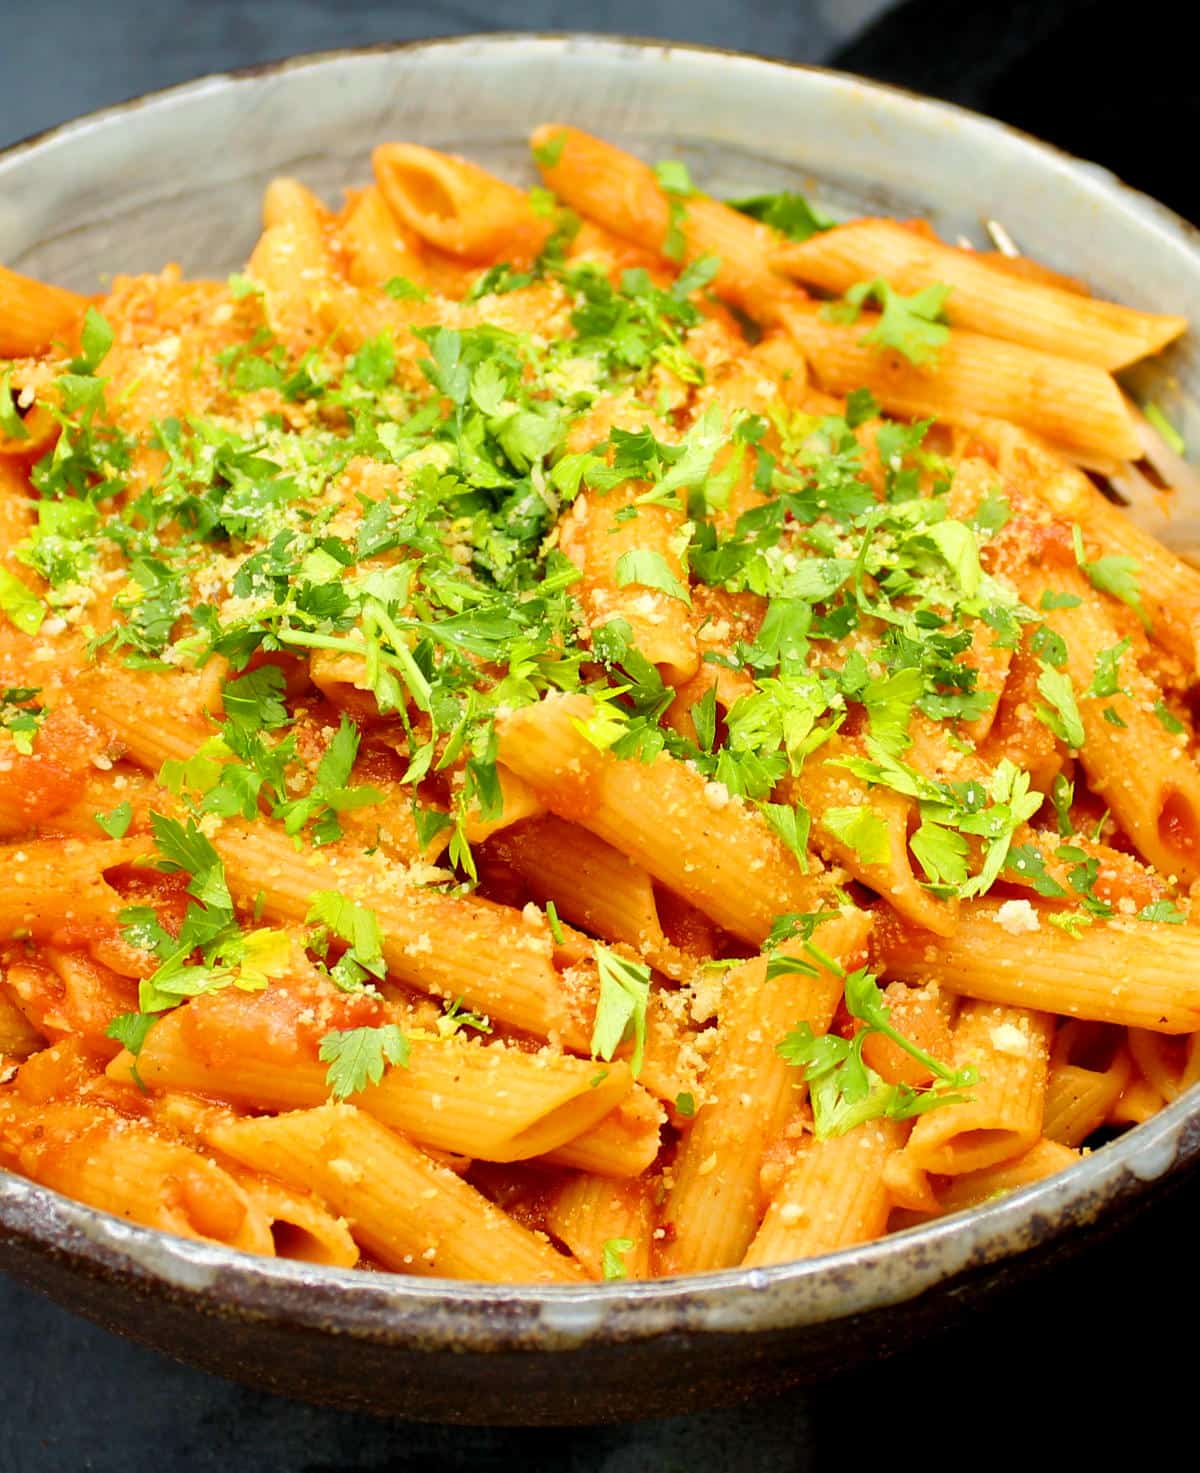 Vegan Pasta Amatriciana in a big bowl with penne pasta, tomato sauce, parsley and cashew parmesan.